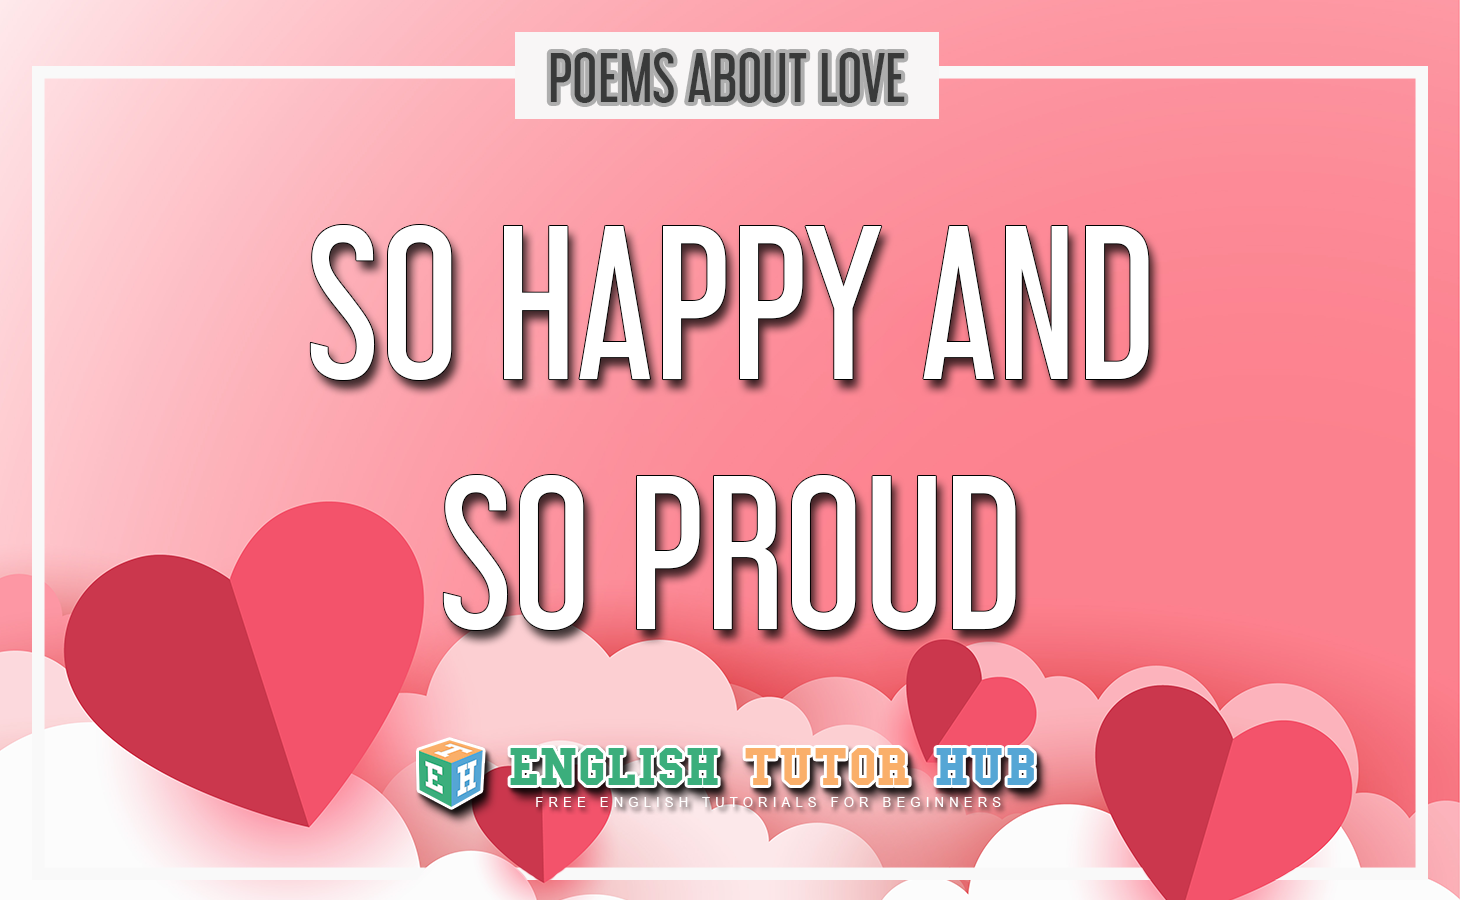 So Happy and So Proud - Poem About Love Summary and Lesson [2022]